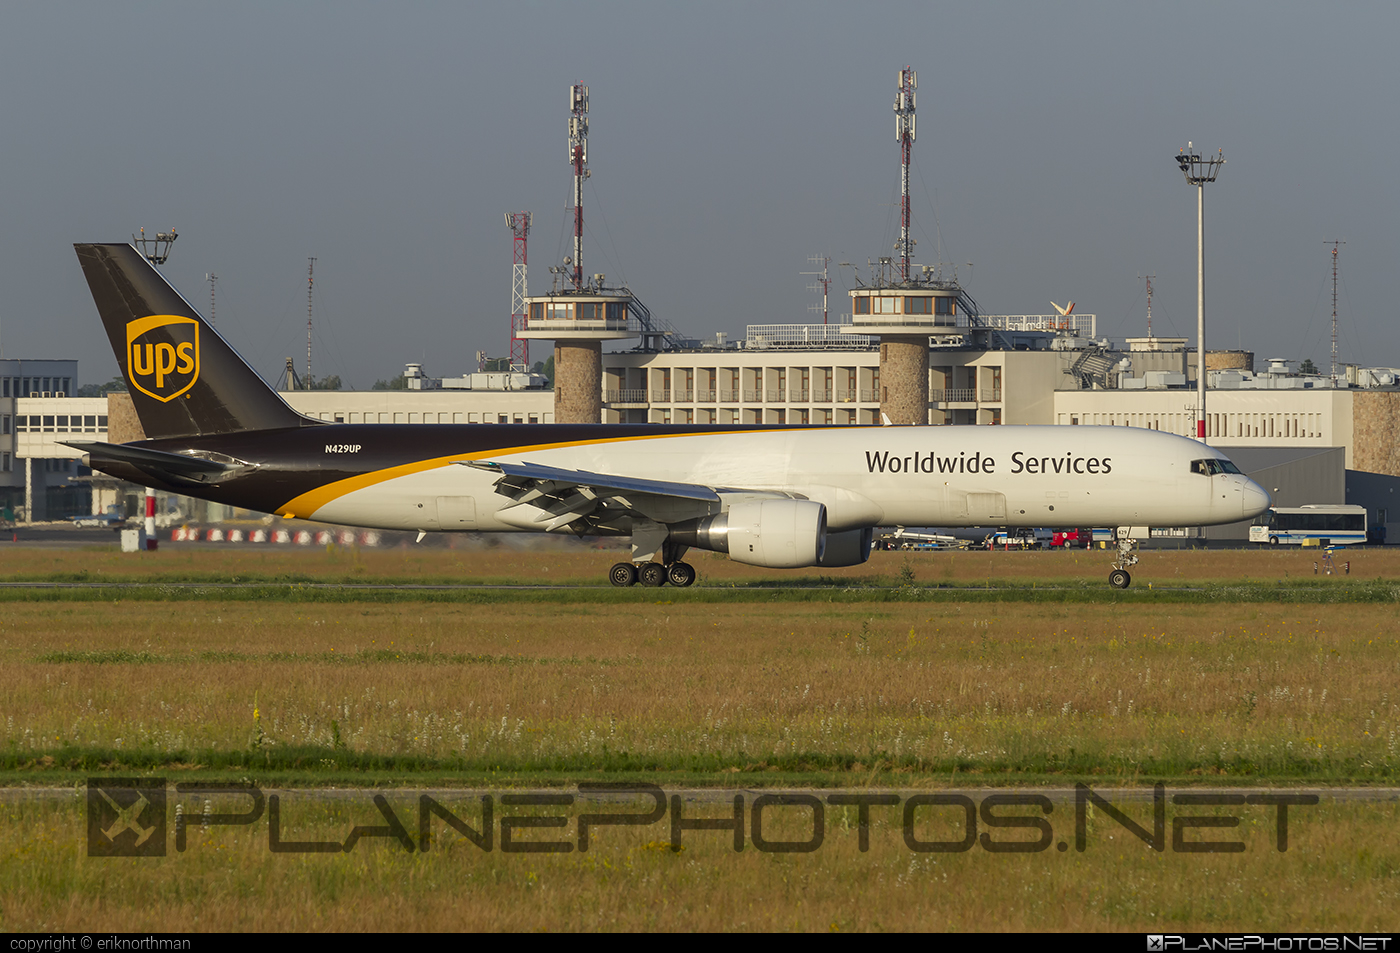 Boeing 757-200PF - N429UP operated by United Parcel Service (UPS) #b757 #boeing #boeing757 #ups #upsairlines